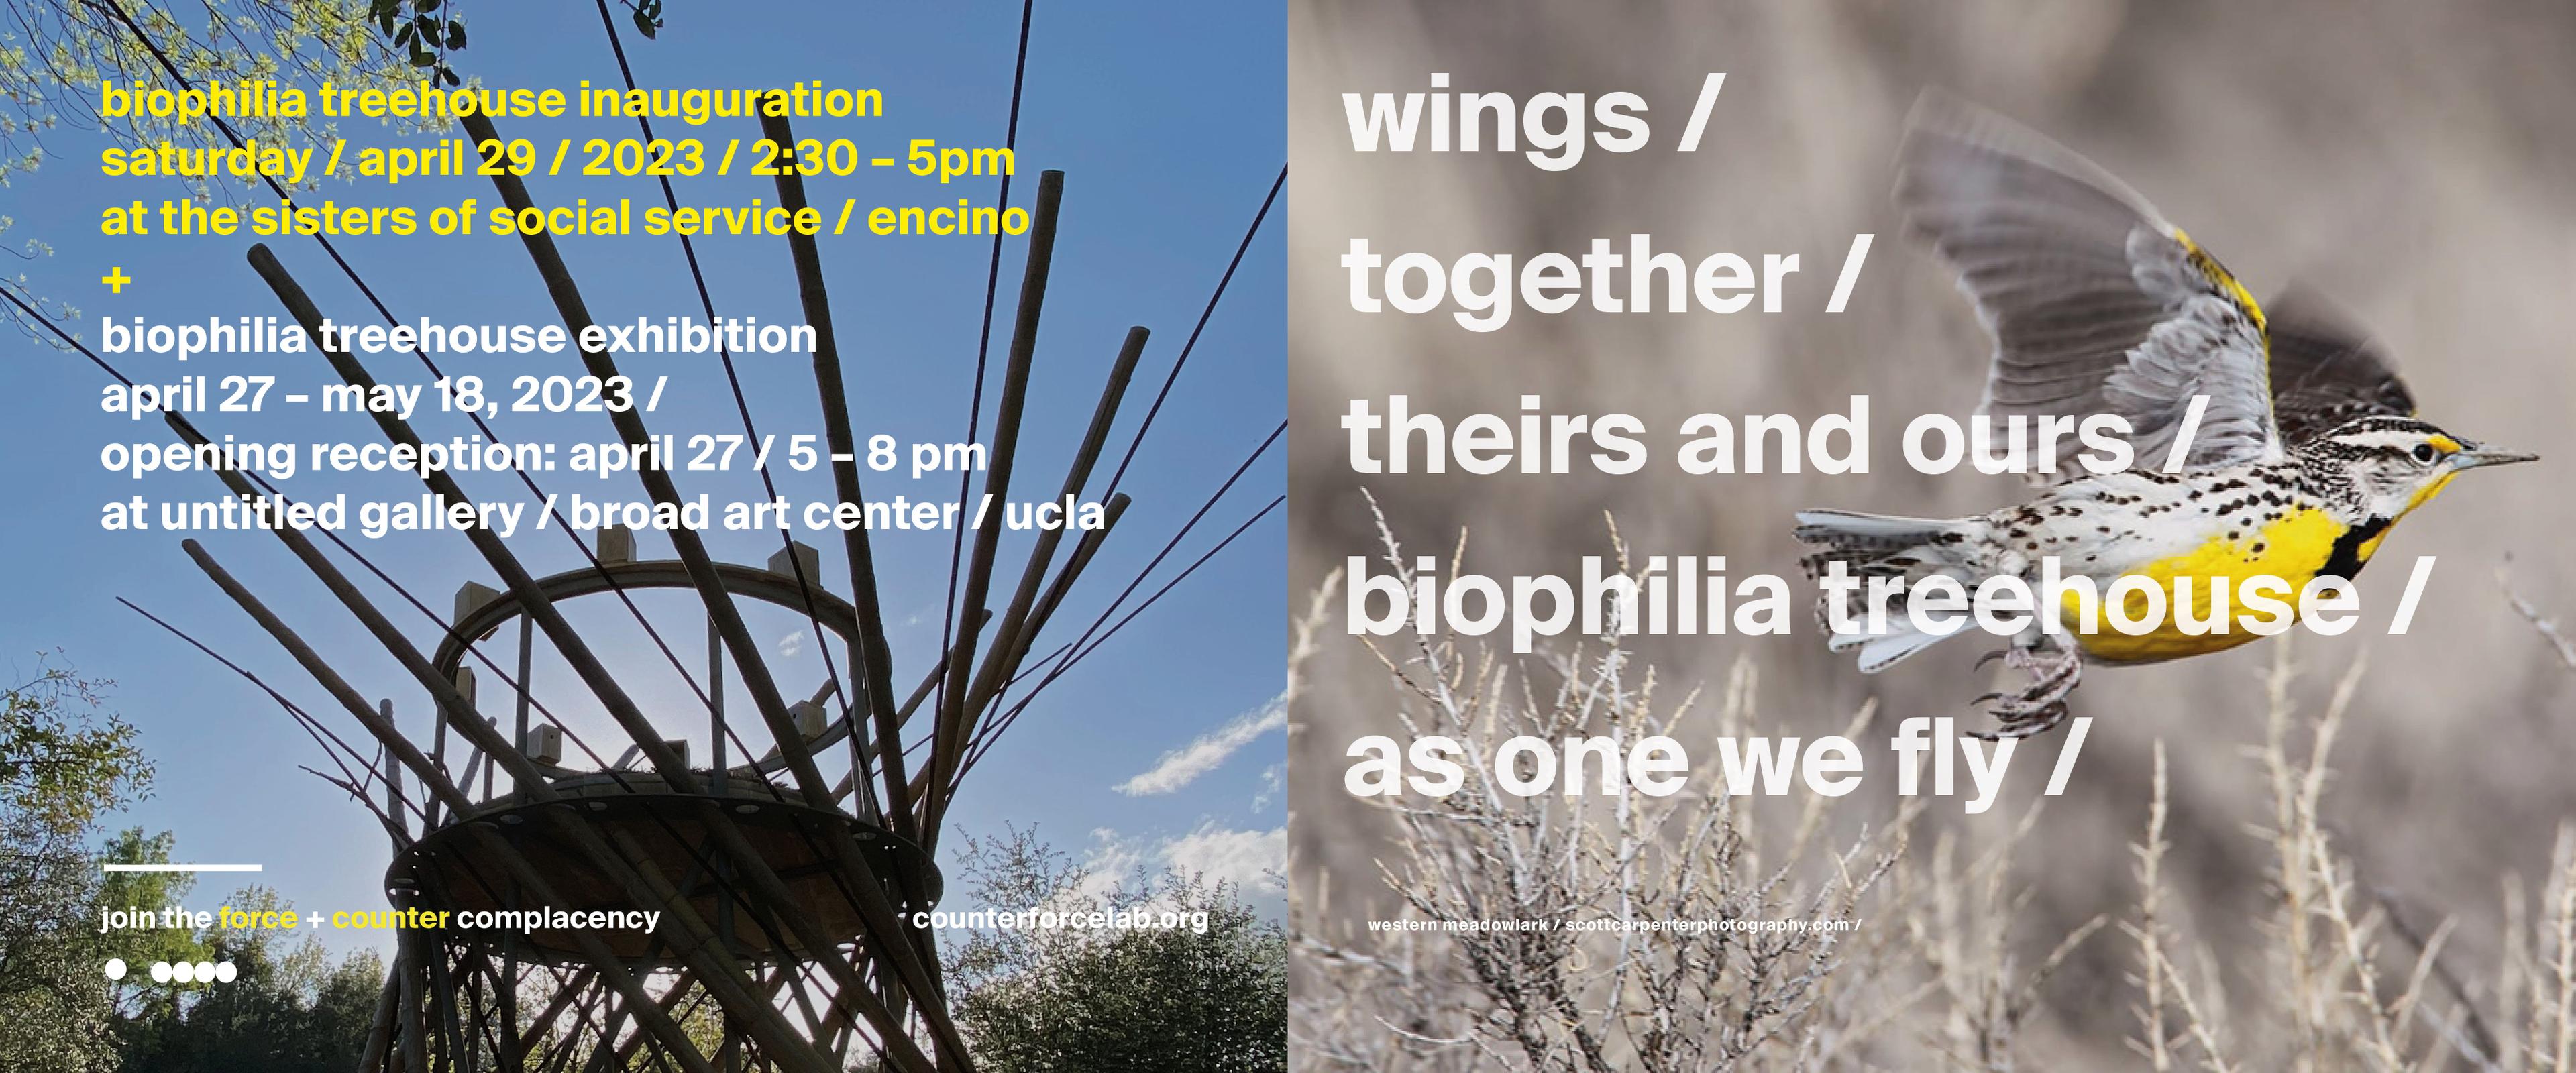 The image on the left is a middle shot of the Biophilia Treehouse surrounded by trees with blue sky. The image on the right is of a beautiful Western Meadowlark bird in flight. 